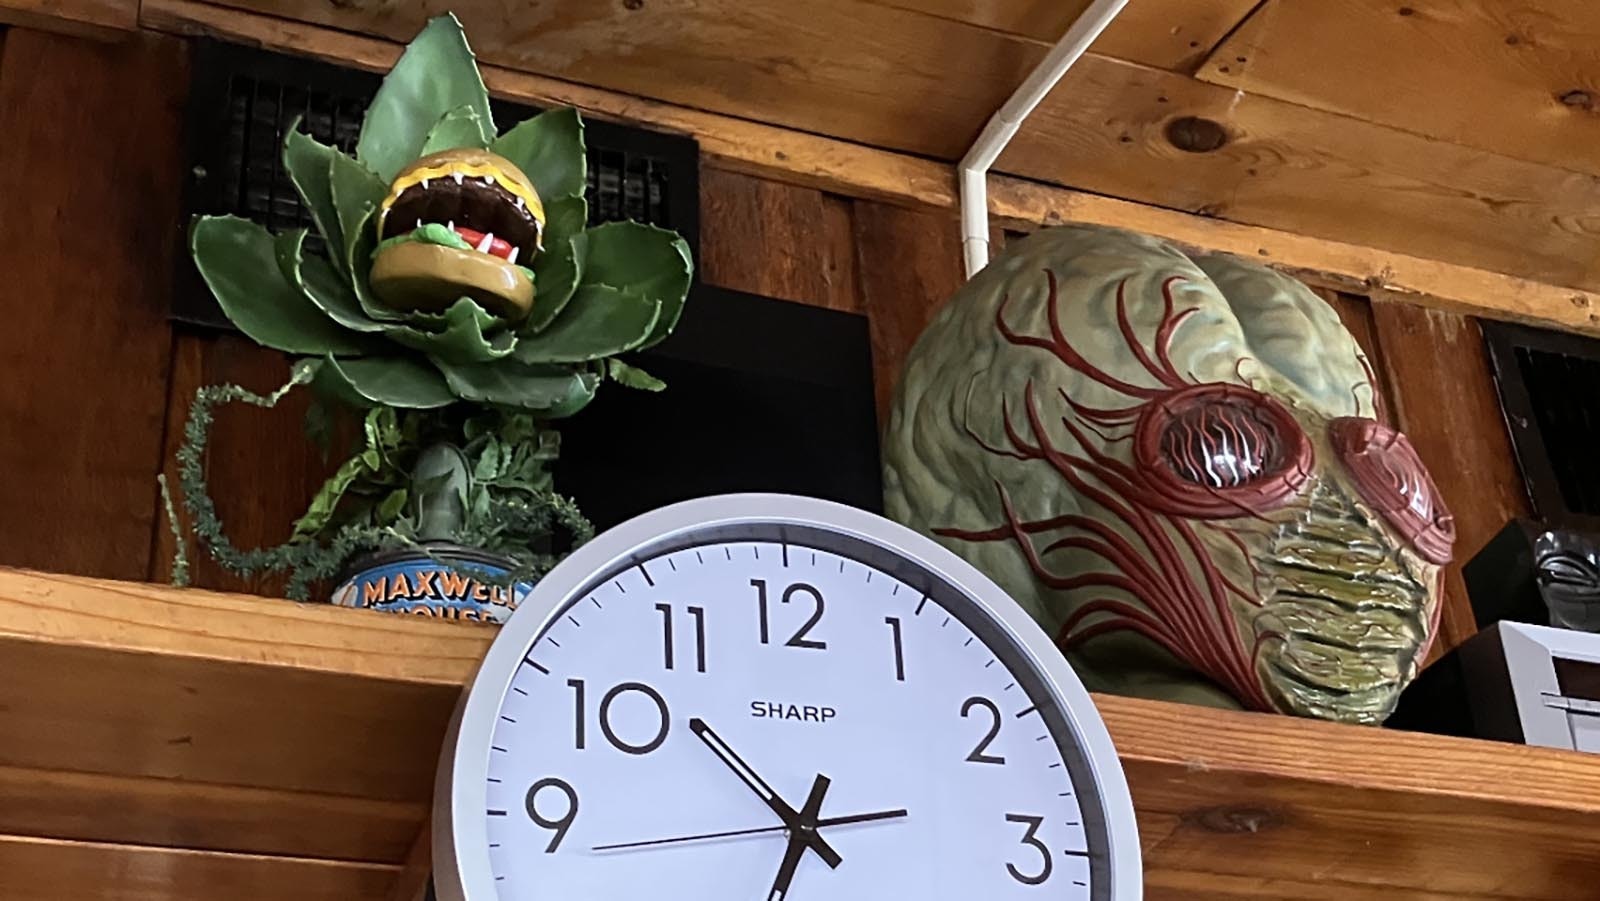 An artist who enjoys the restaurant made an “Audrey II” character from the “Little Shop of Horrors” movie for the restaurant. It has been named “Audrey III.” A customer also offered the restaurant an alien head, which the owners accepted, trading the customer for food.